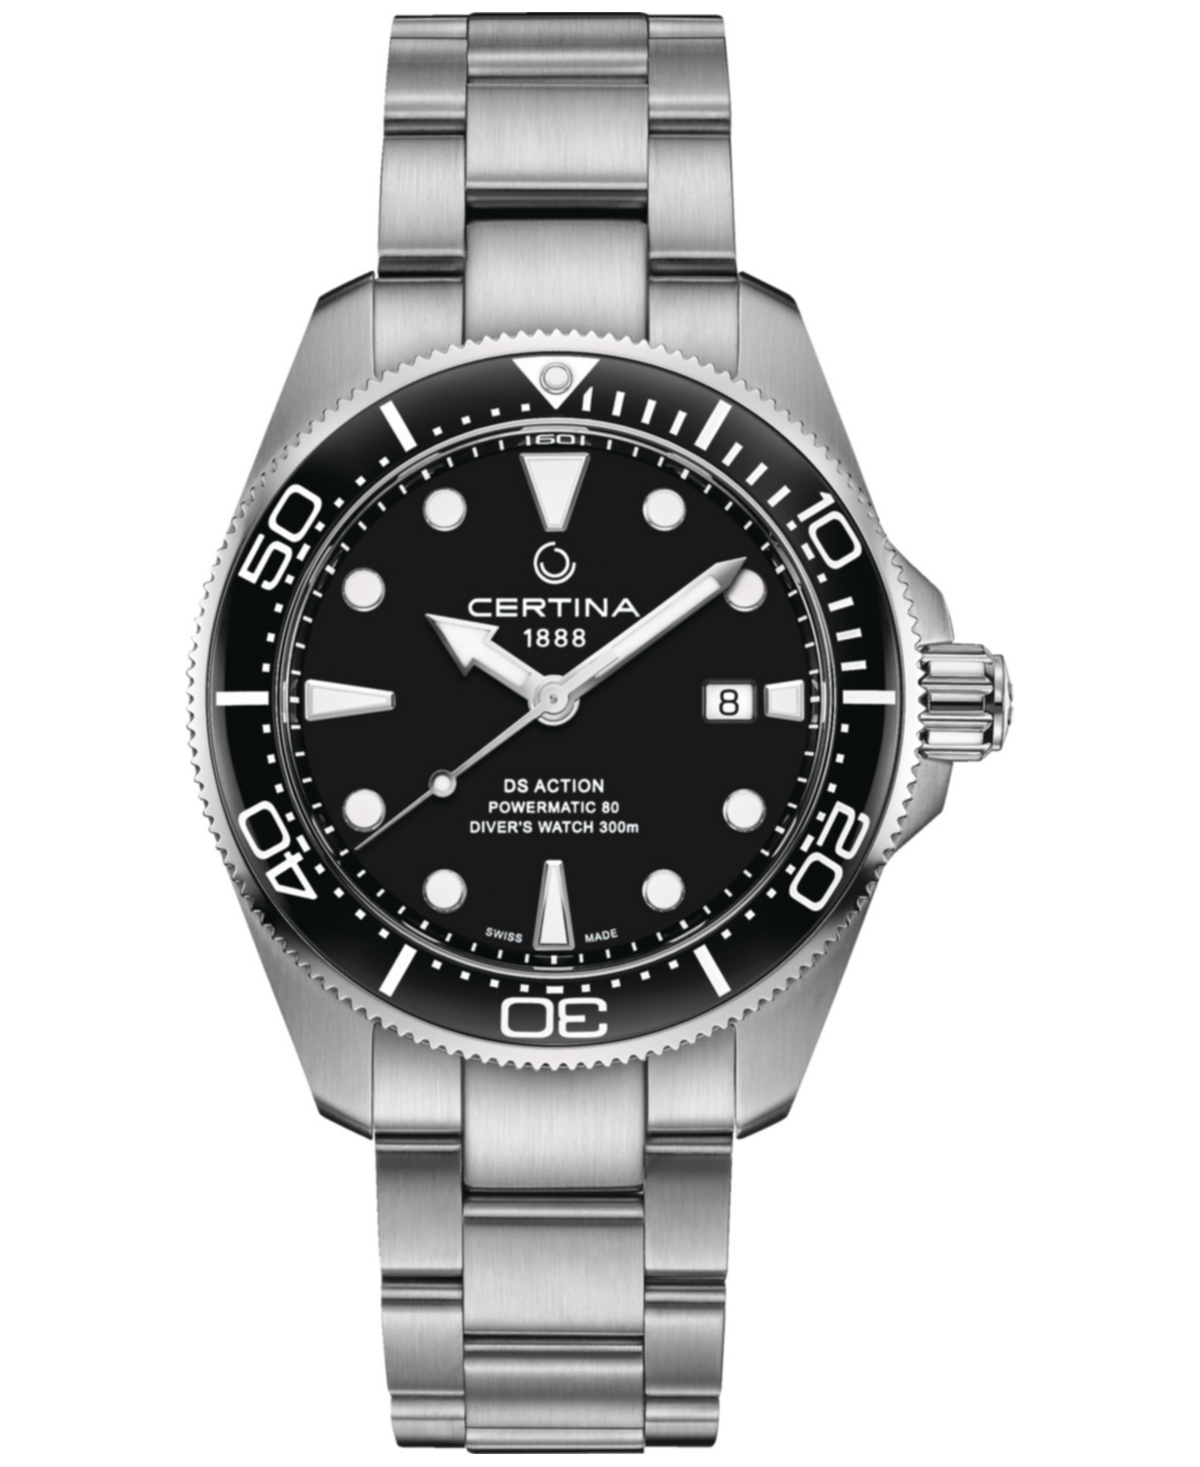 Certina Men's Swiss Autometic Ds Action Diver Stainless Steel Bracelet Watch 43mm In Black